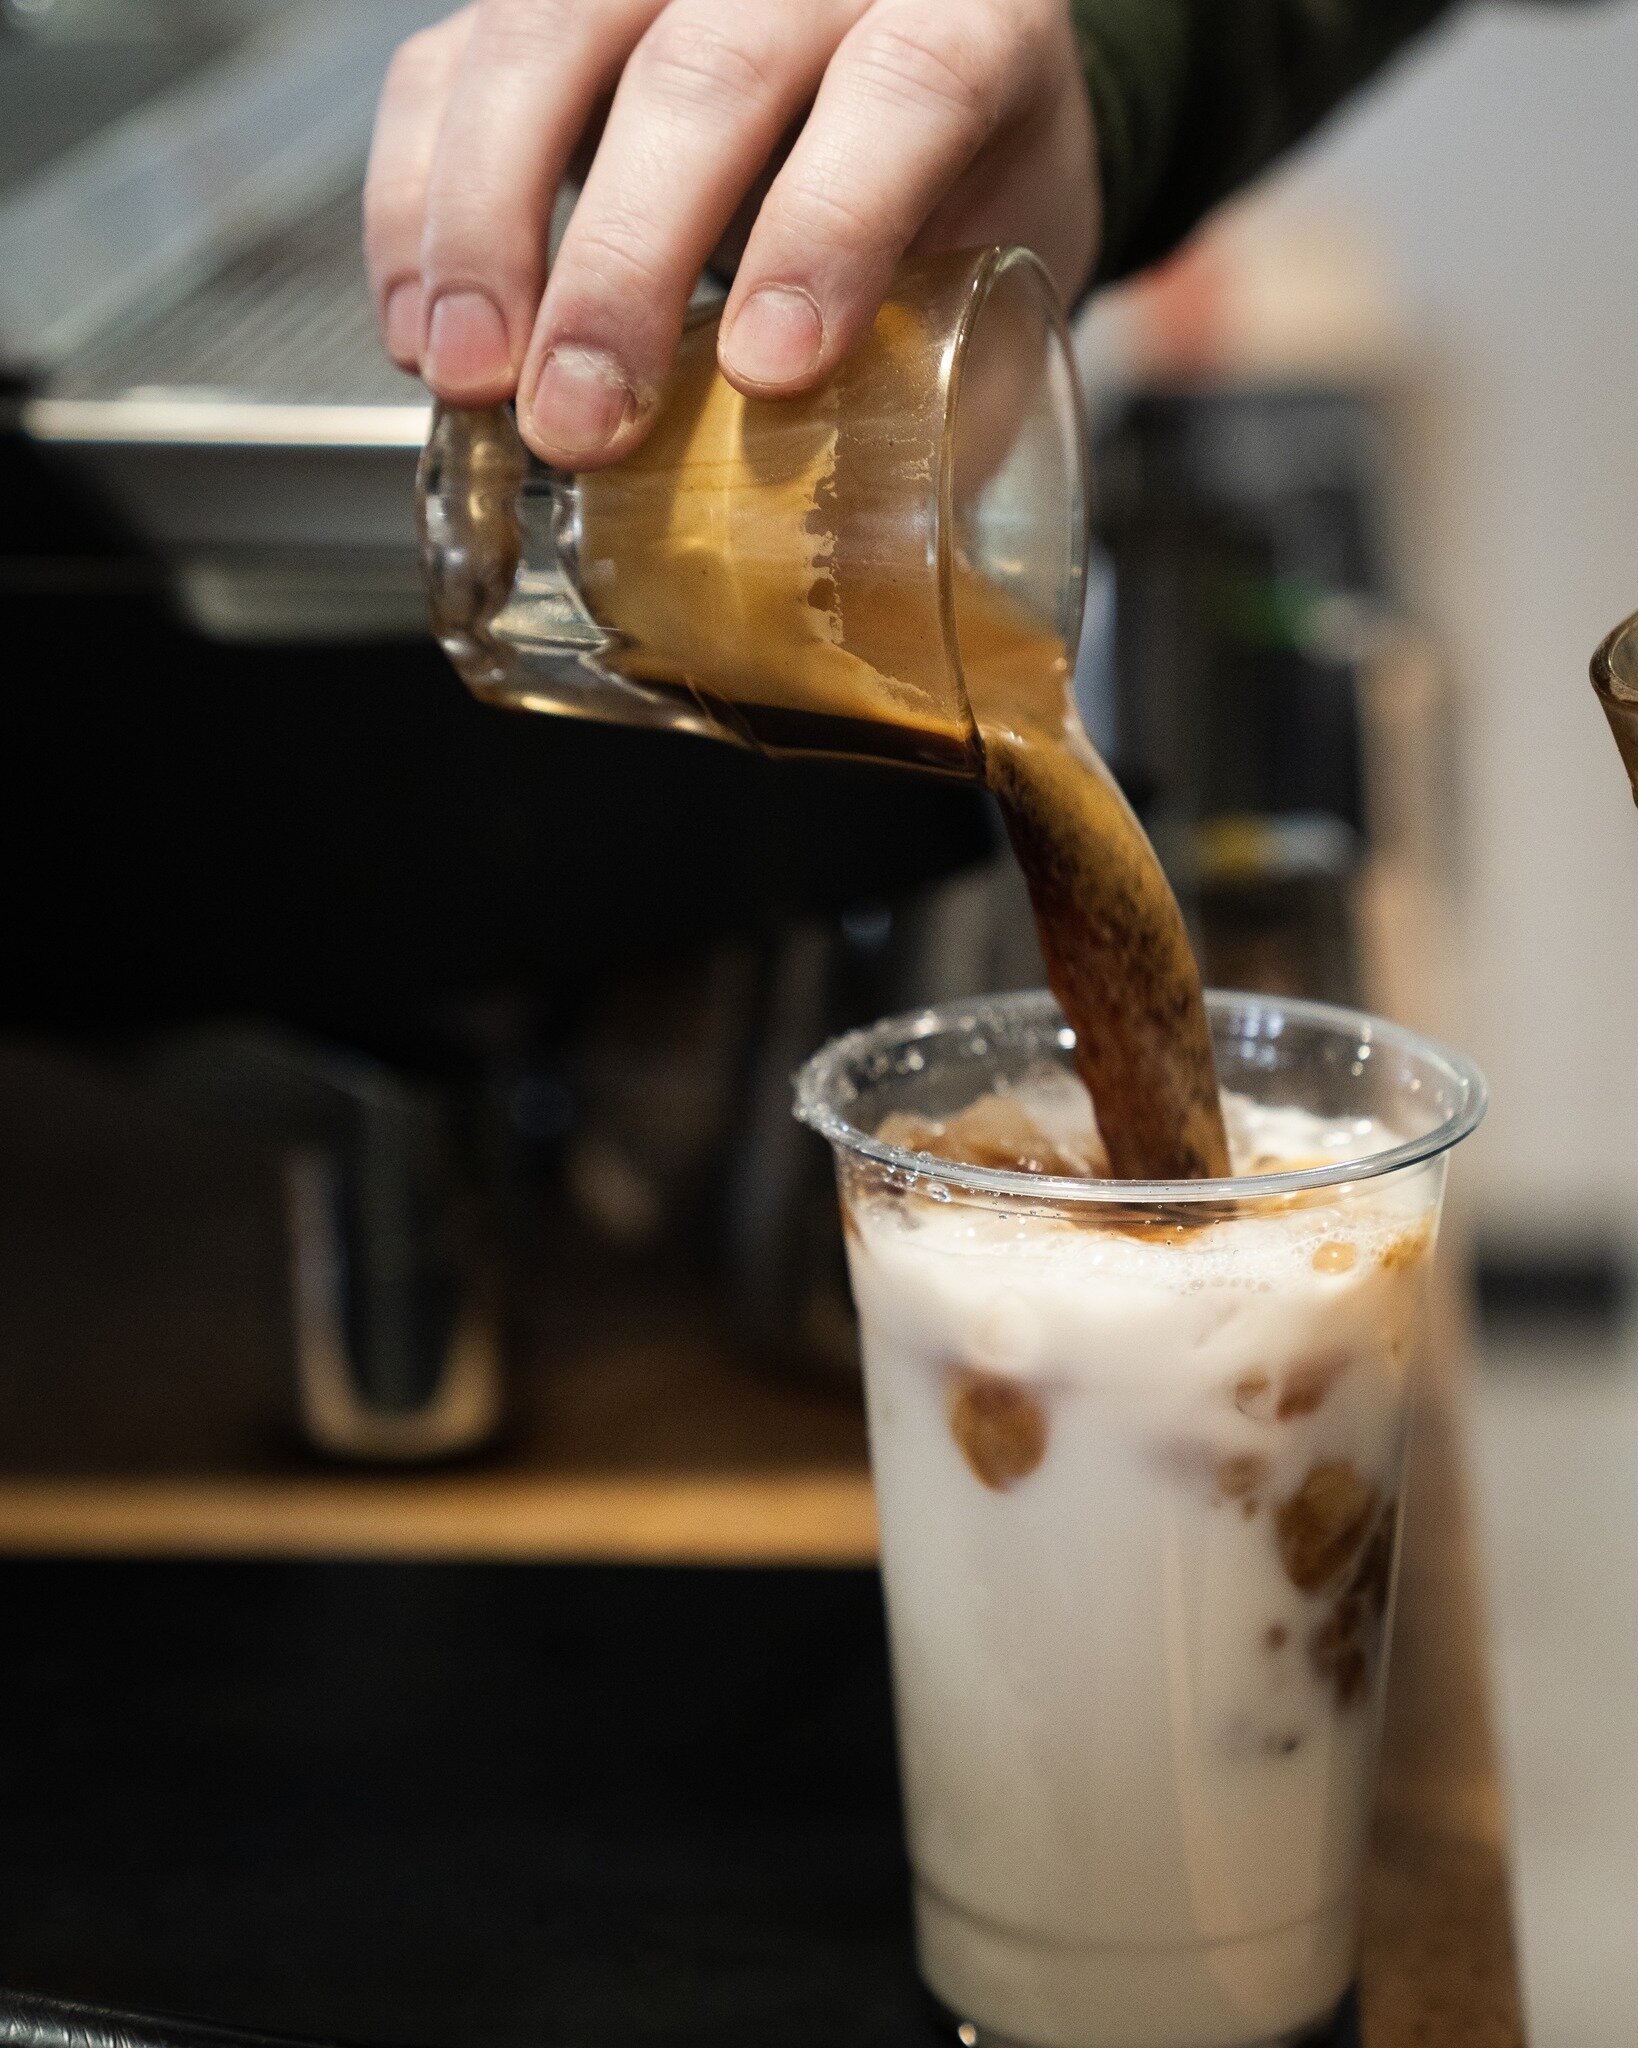 Iced Latte (w/ Almond Milk)

We have Oat, Almond, and Coconut milk to make any drink exceptional! Pair them with a sugar free vanilla or raspberry and you got yourself one healthy beverage!
____
&bull;
&bull;
##latt&eacute; #groundedcoffeeandcrumbs #